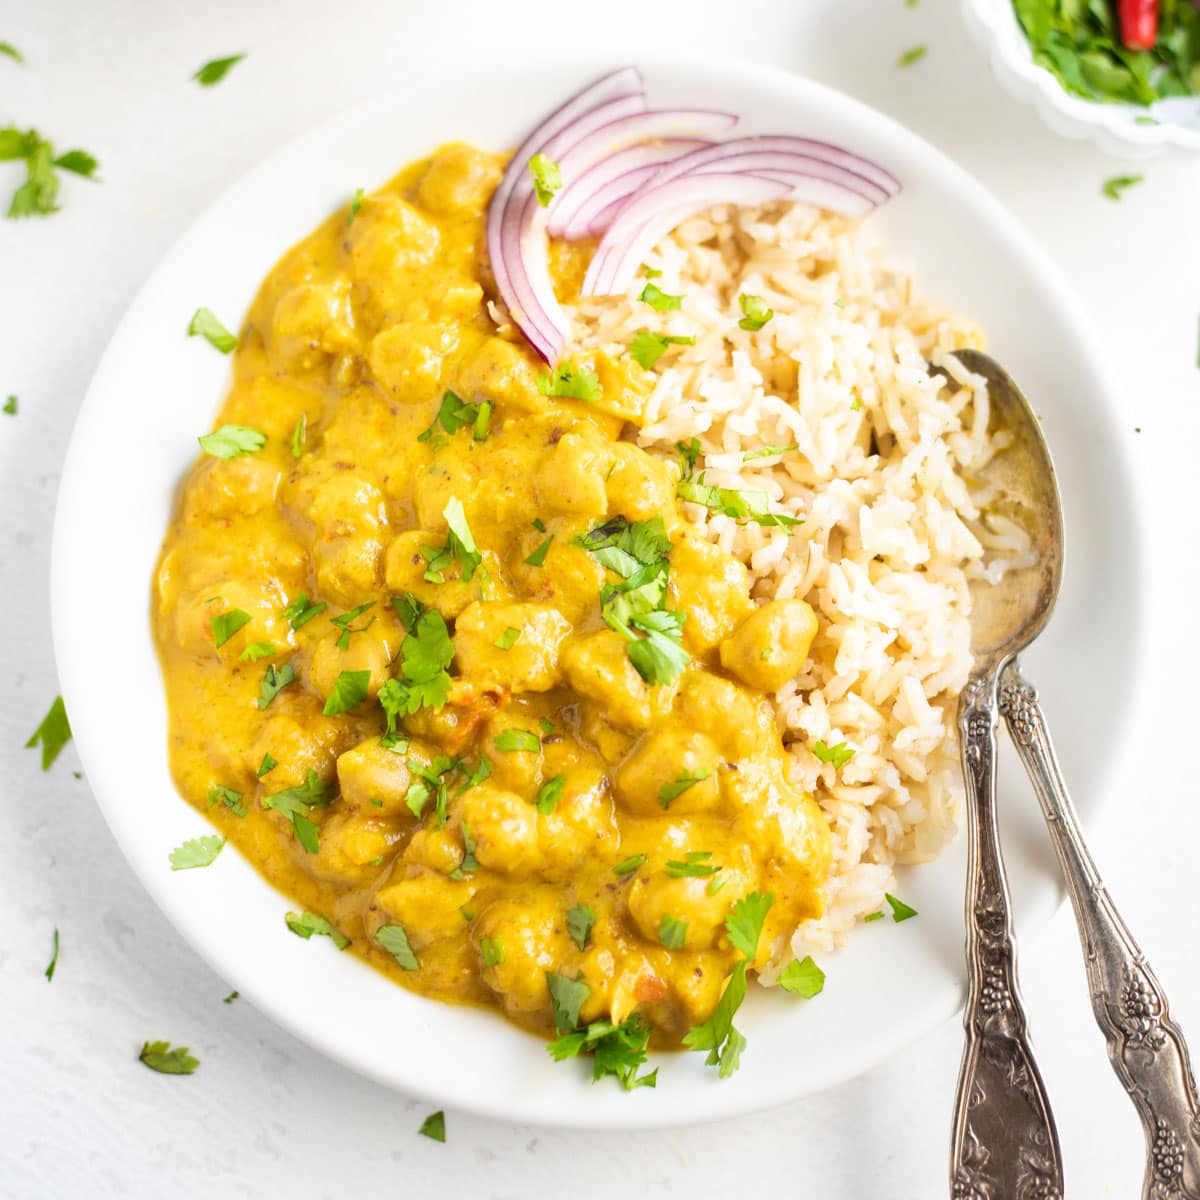 Instant Pot Pot-in-Pot Rice (Pressure Cooker) - Piping Pot Curry